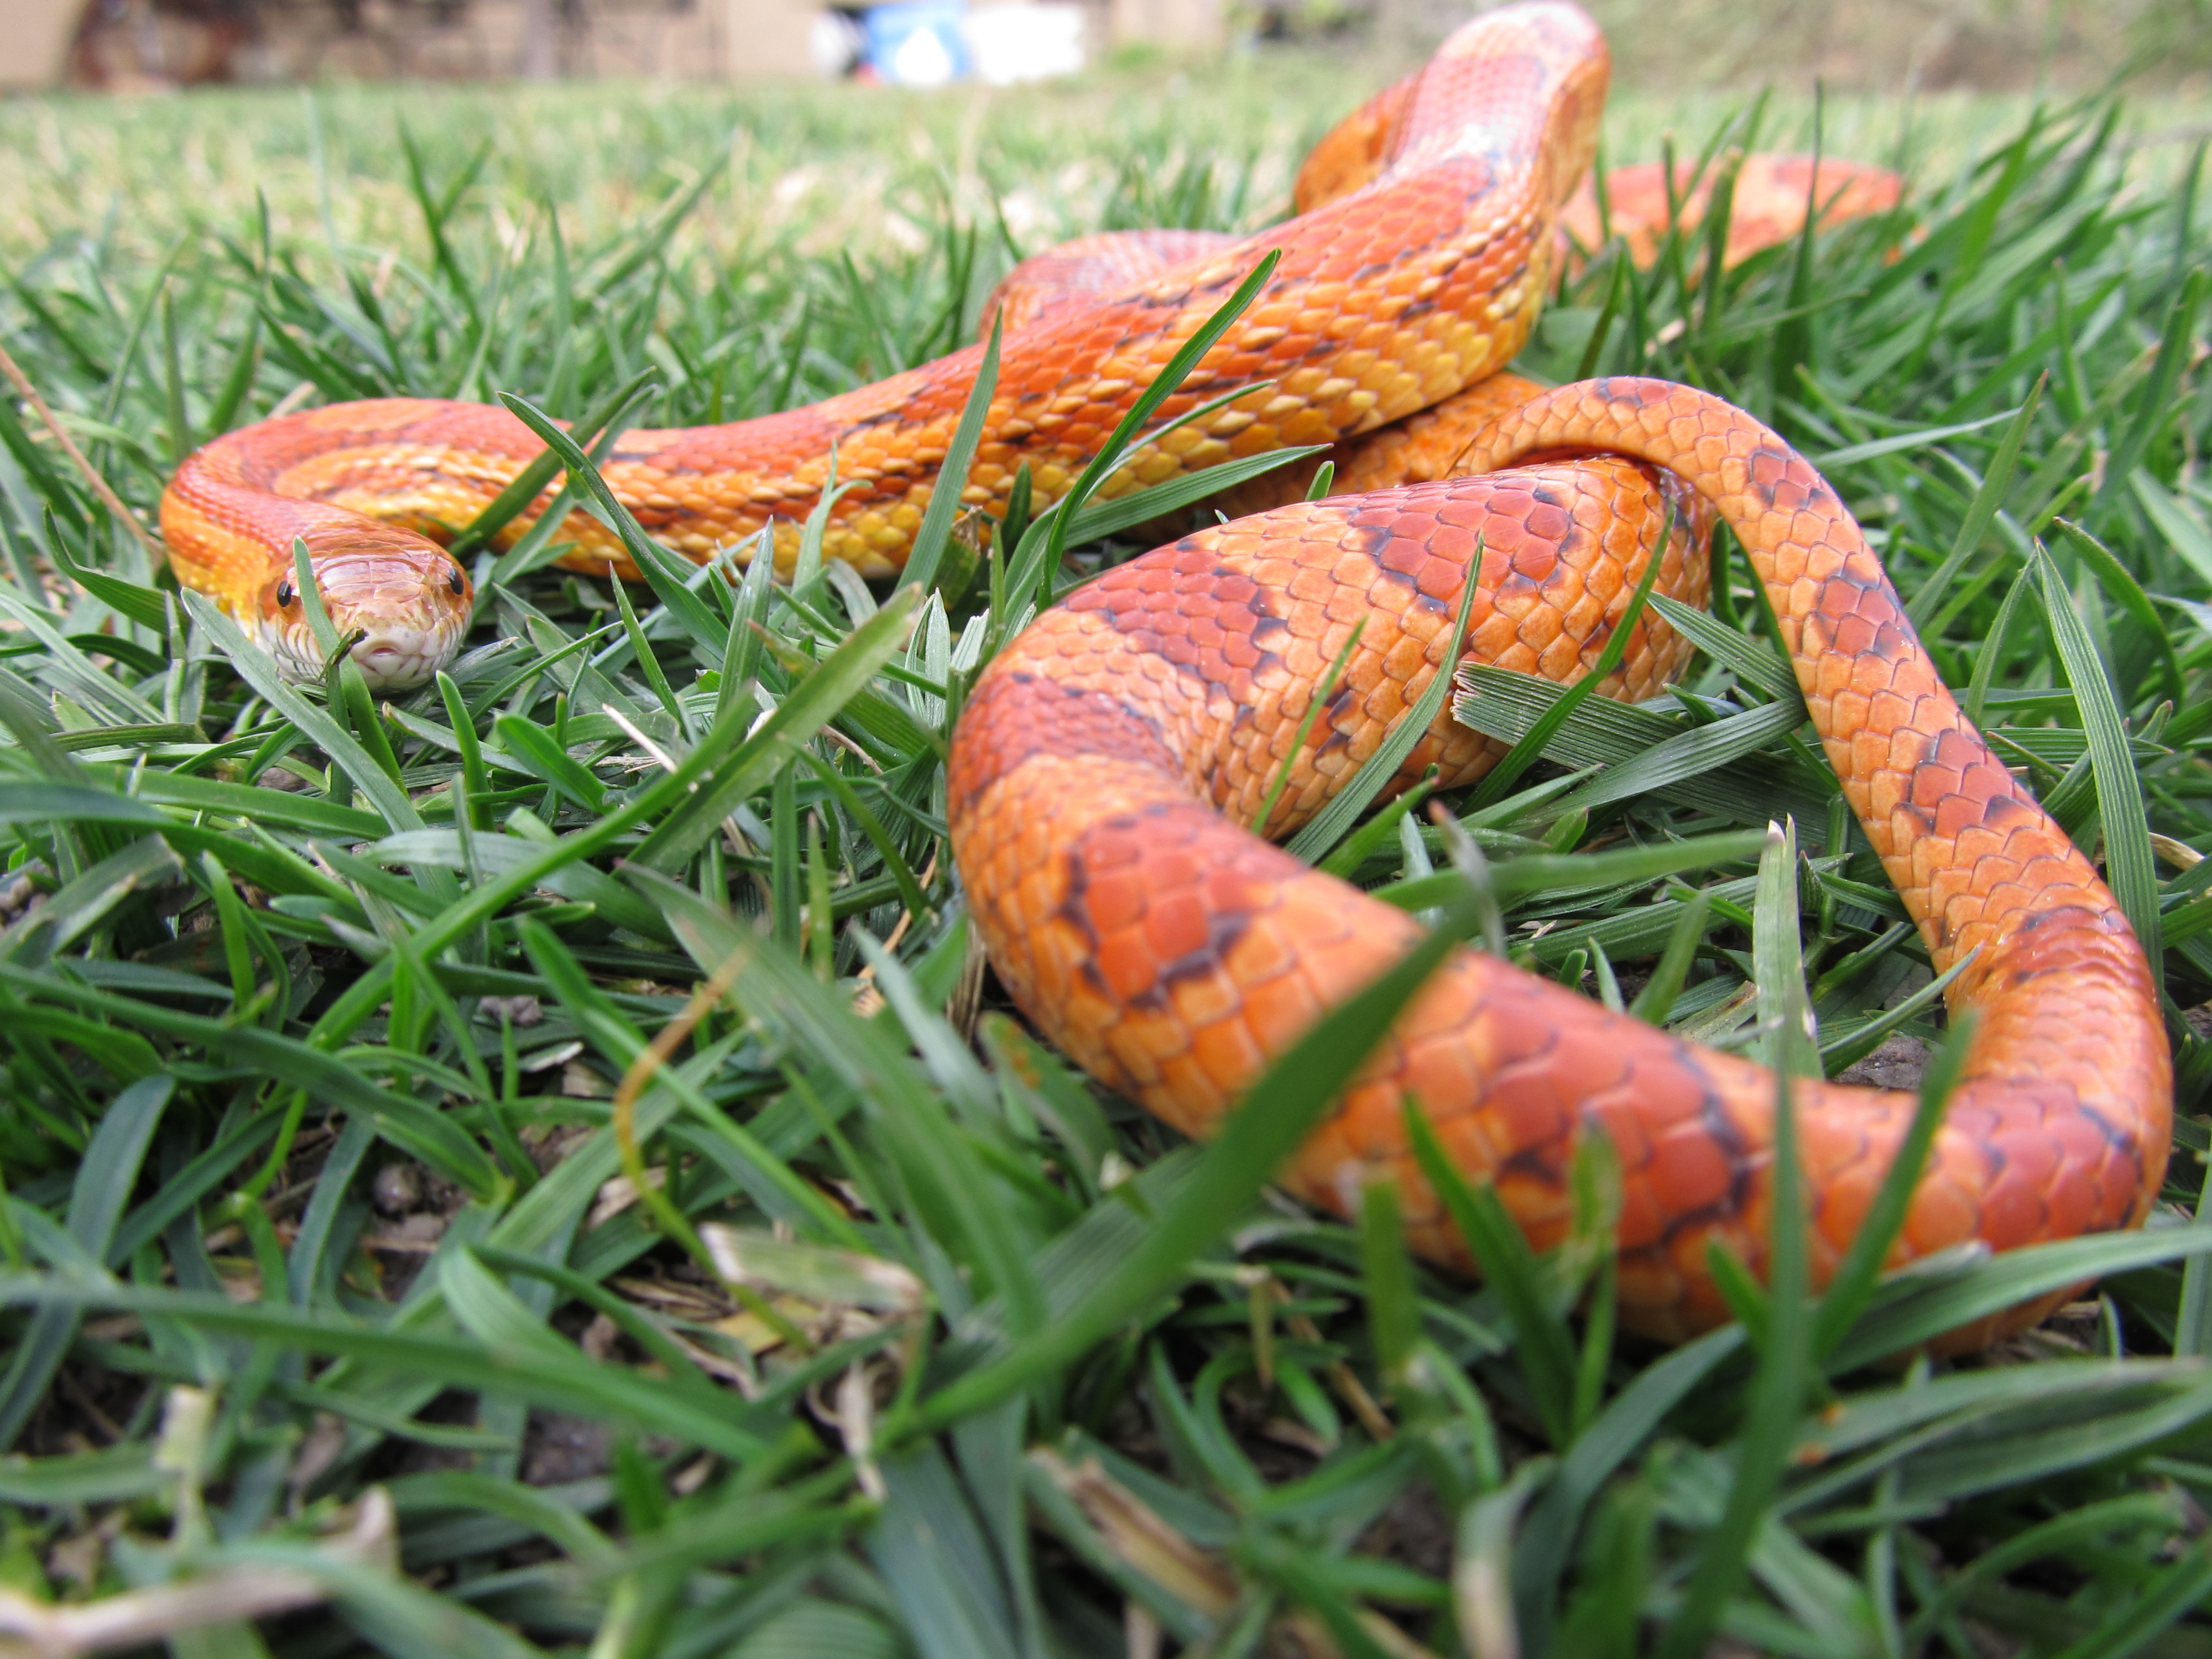 A vibrant corn snake slithers through grass in this HD desktop wallpaper.